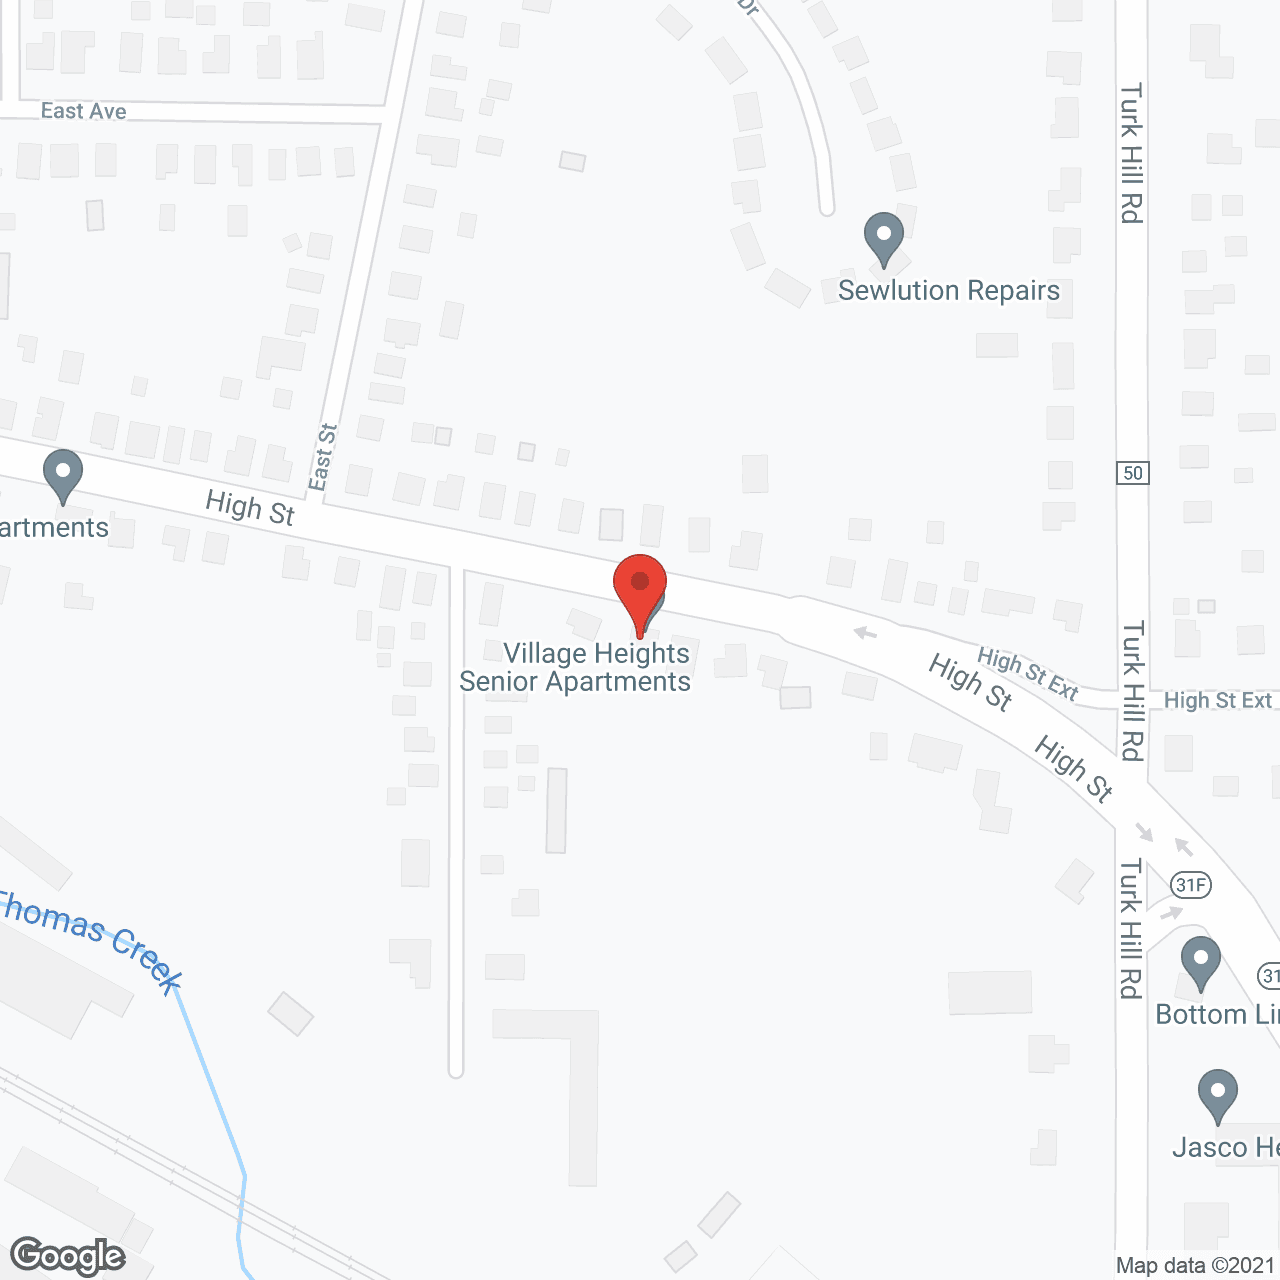 Village Heights Senior Apartments in google map